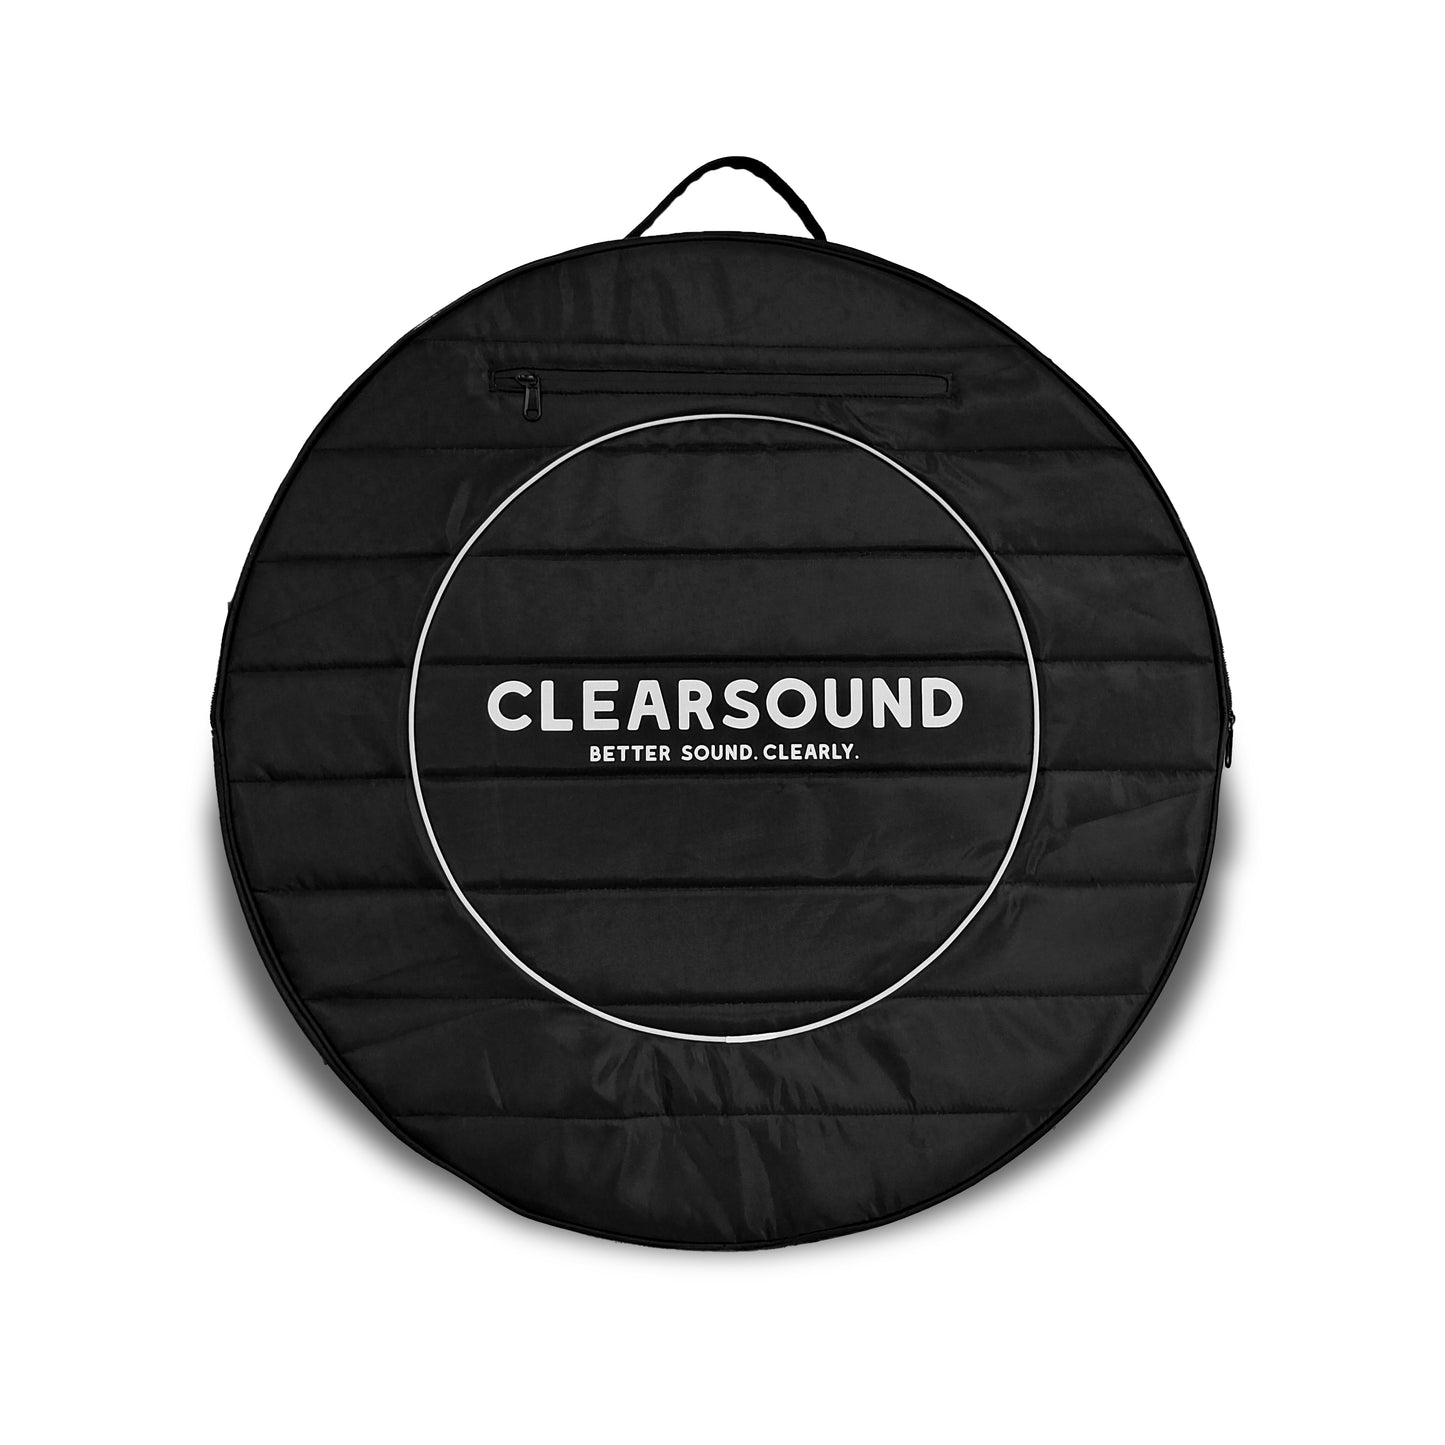 The Clearsound Ultimate